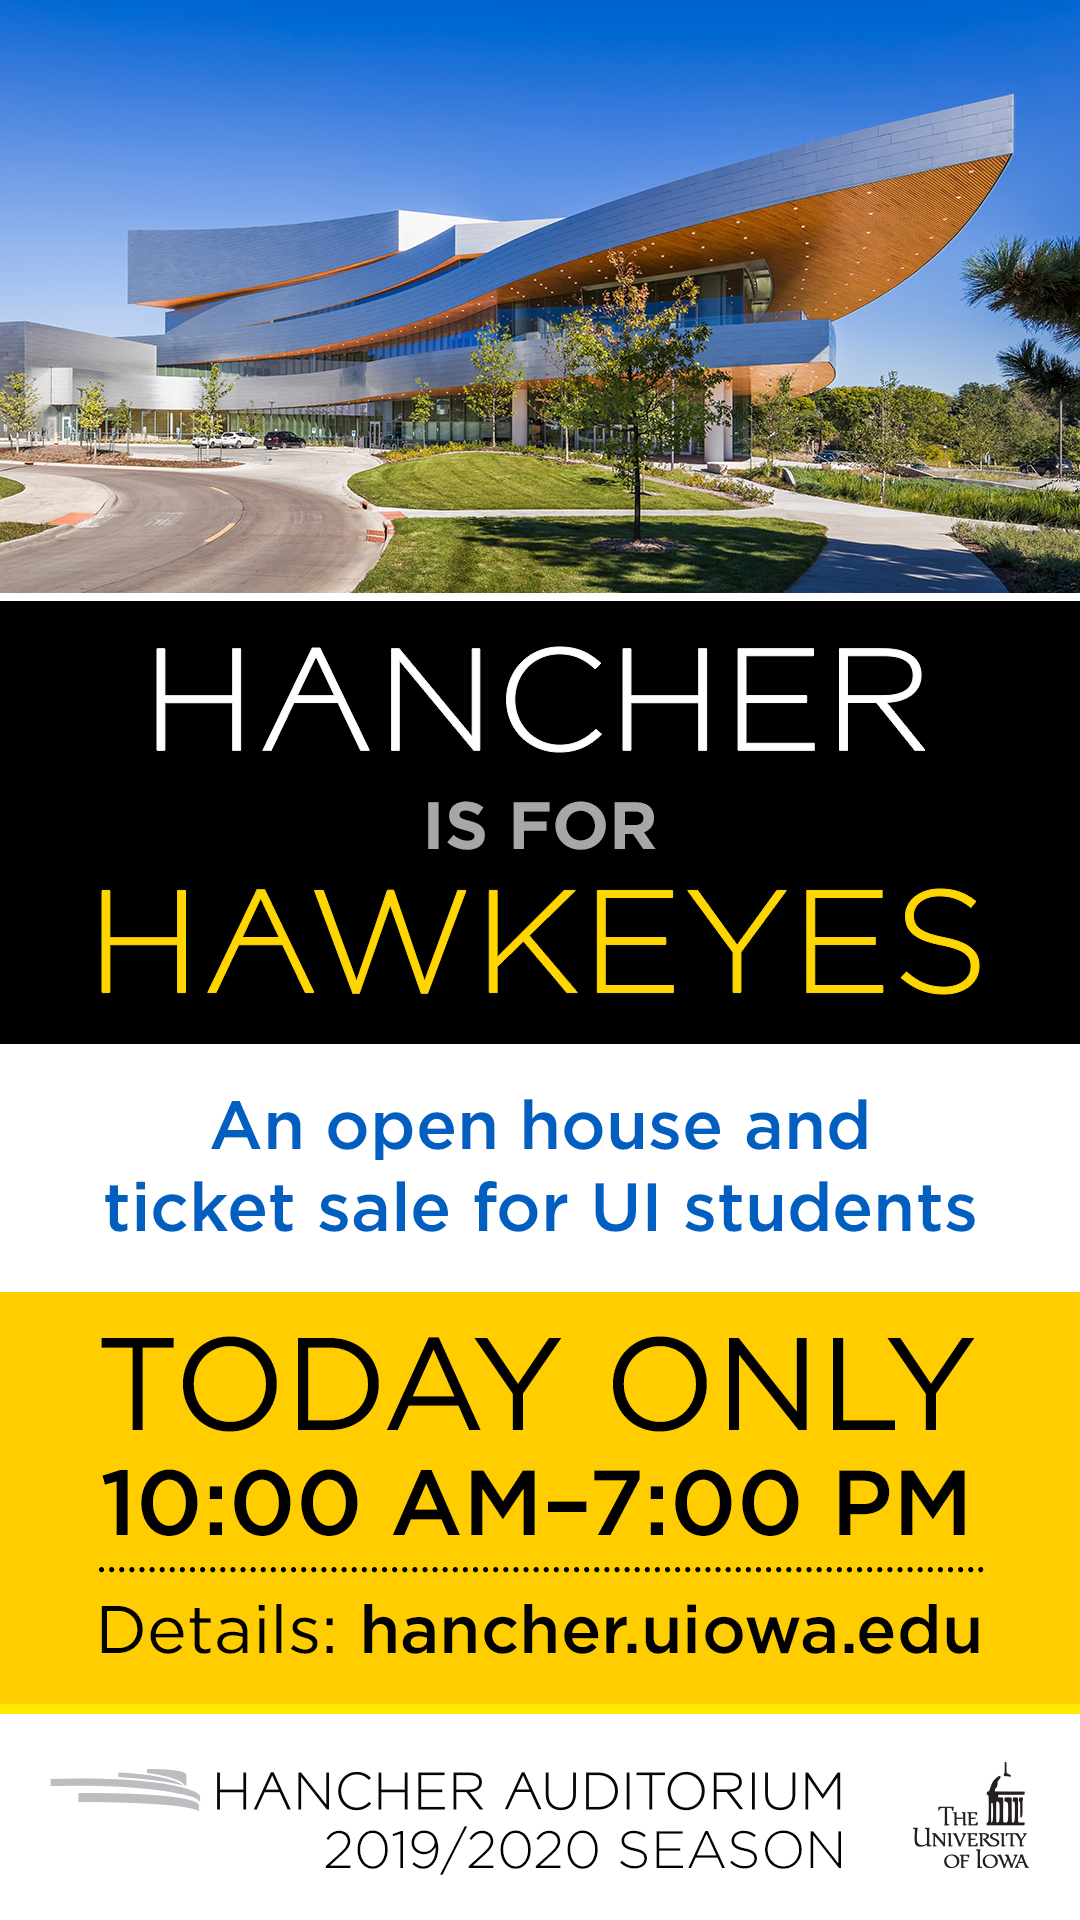 Hancher is for Hawkeyes: An open houseand ticket sale for UI students